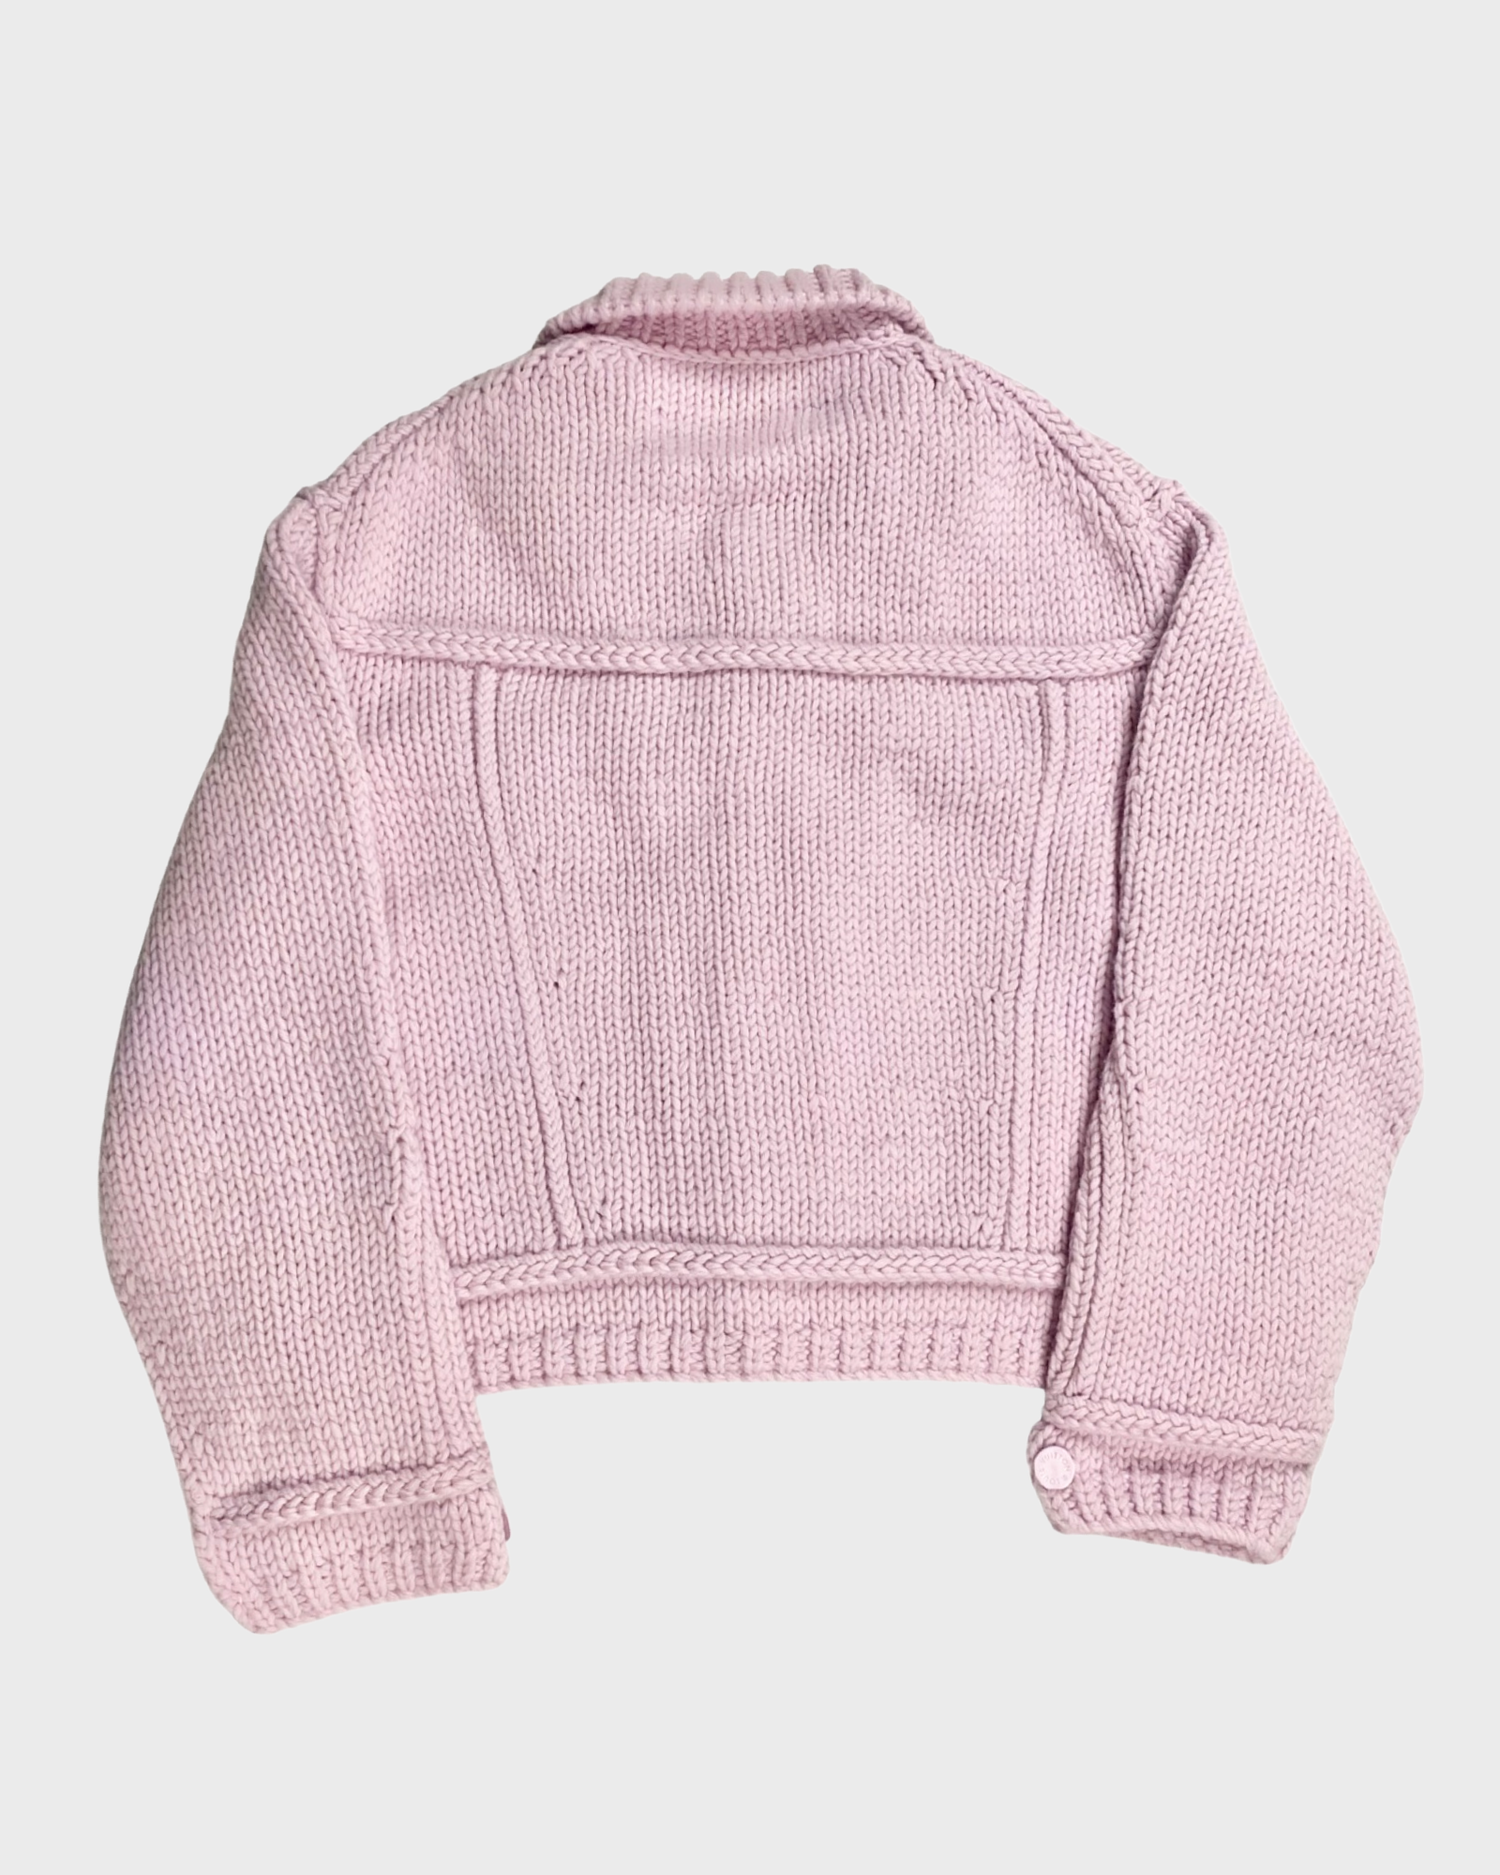 LV SS20 ASIA EXCLUSIVE PINK CHUNKY HEAVY KNIT TRUCKER